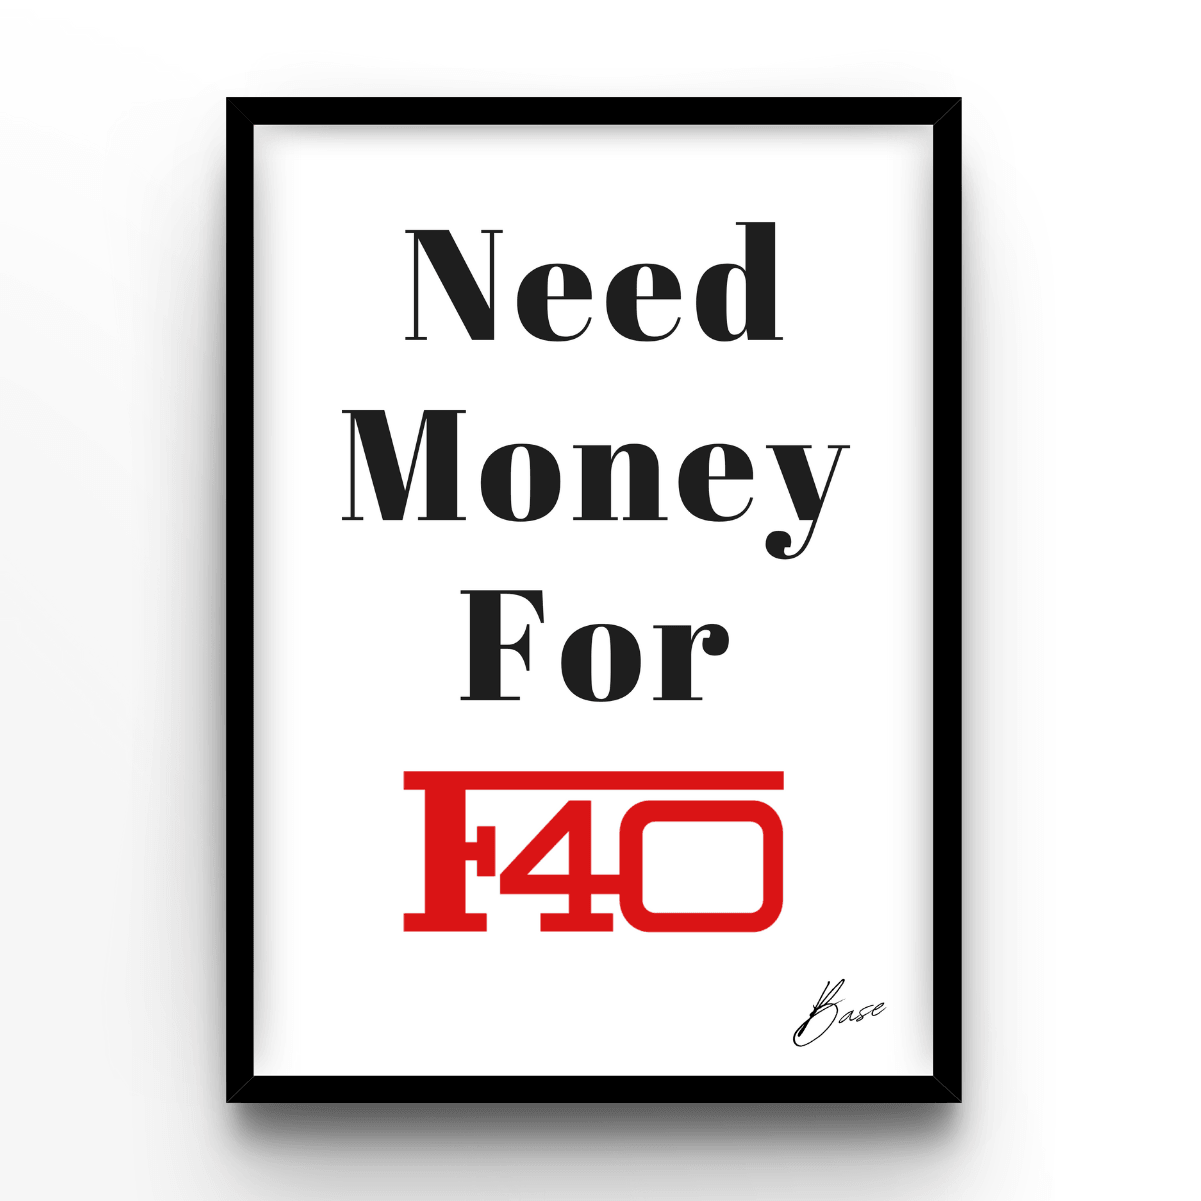 Need Money For F40 - A4, A3, A2 Posters Base - Poster Print Shop / Art Prints / PostersBase